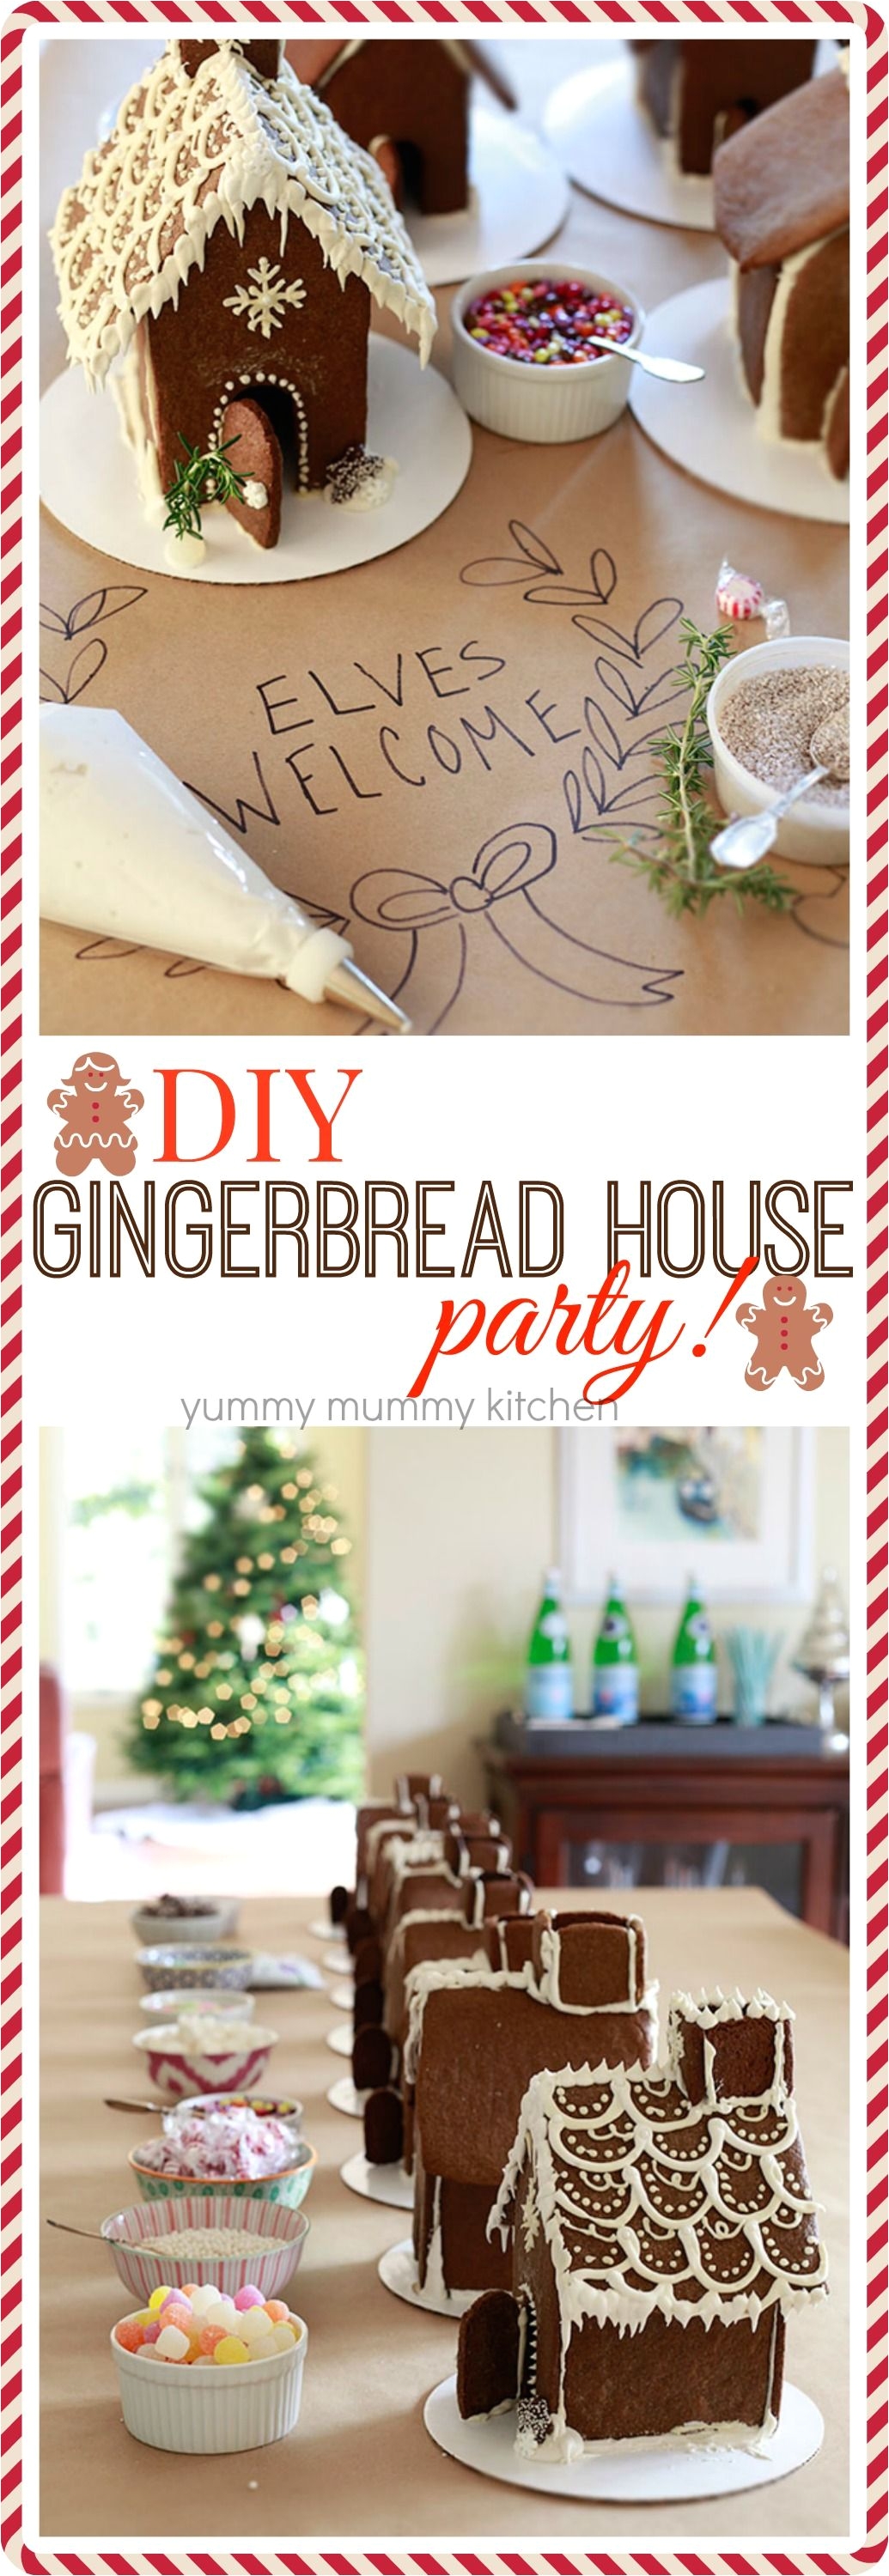 make your own gingerbread house party we love making gingerbread houses with our friends decorating gingerbread houses is a fun tradition for kids and